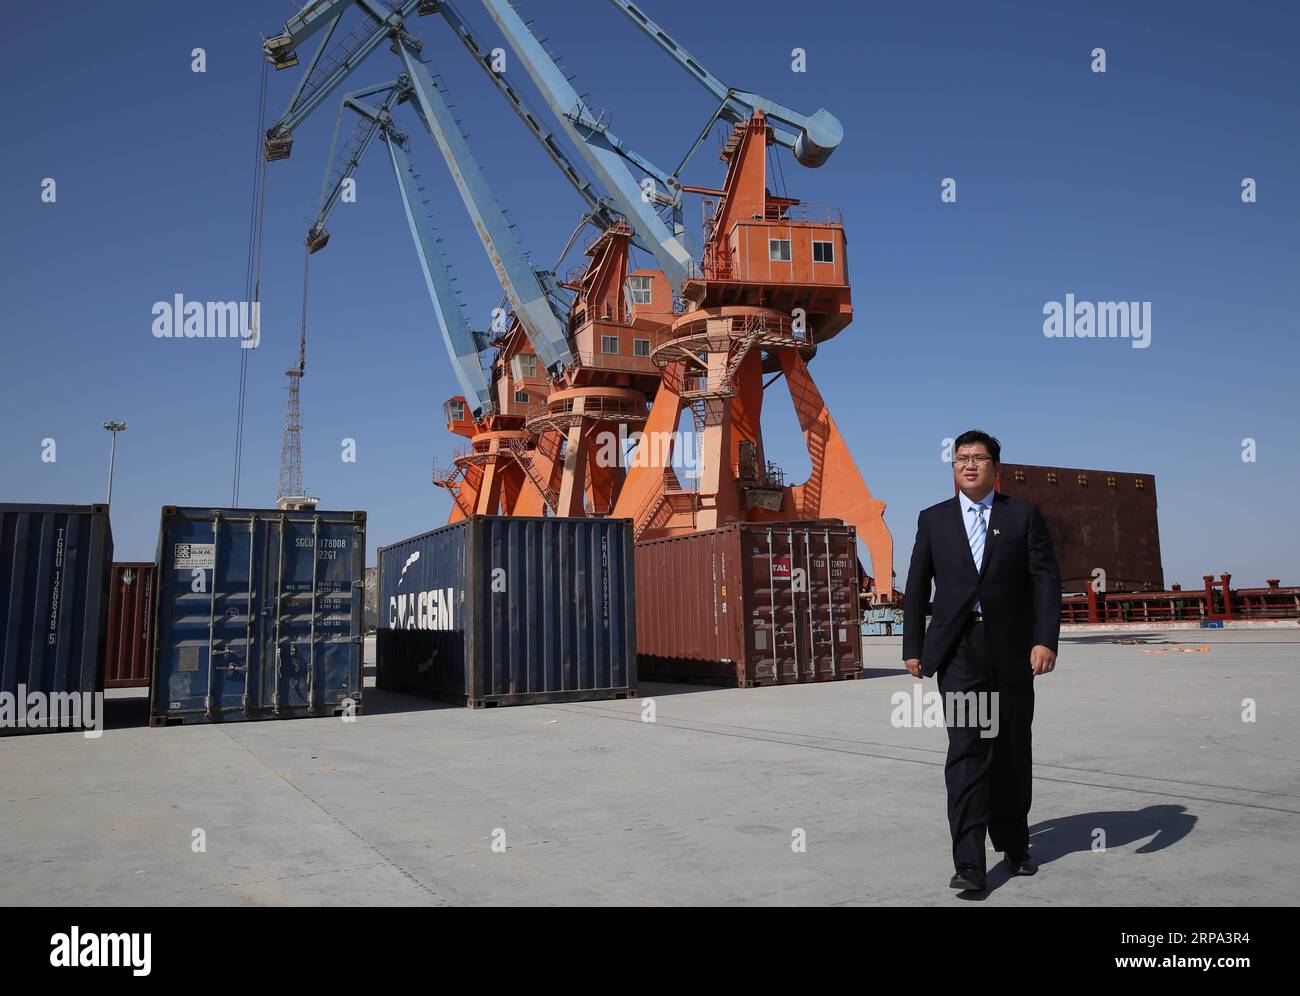 (190424) -- BEIJING, April 24, 2019 (Xinhua) -- Xu Yao, manager of Infrastructure Department of Gwadar Free Zone Company Ltd. of China Overseas Ports Holding Company, inspects the Gwadar Port in Gwadar, Pakistan, Nov. 13, 2016. The 3,000-kilometer China-Pakistan Economic Corridor (CPEC), which stretches from Kashgar in northwest China s Xinjiang Uygur Autonomous Region to the Gwadar Port in Pakistan, serves as a significant channel to facilitate connections in road, rail, gas and optical fiber among countries along the corridor. The CPEC is a landmark project for China-Pakistan cooperation in Stock Photo